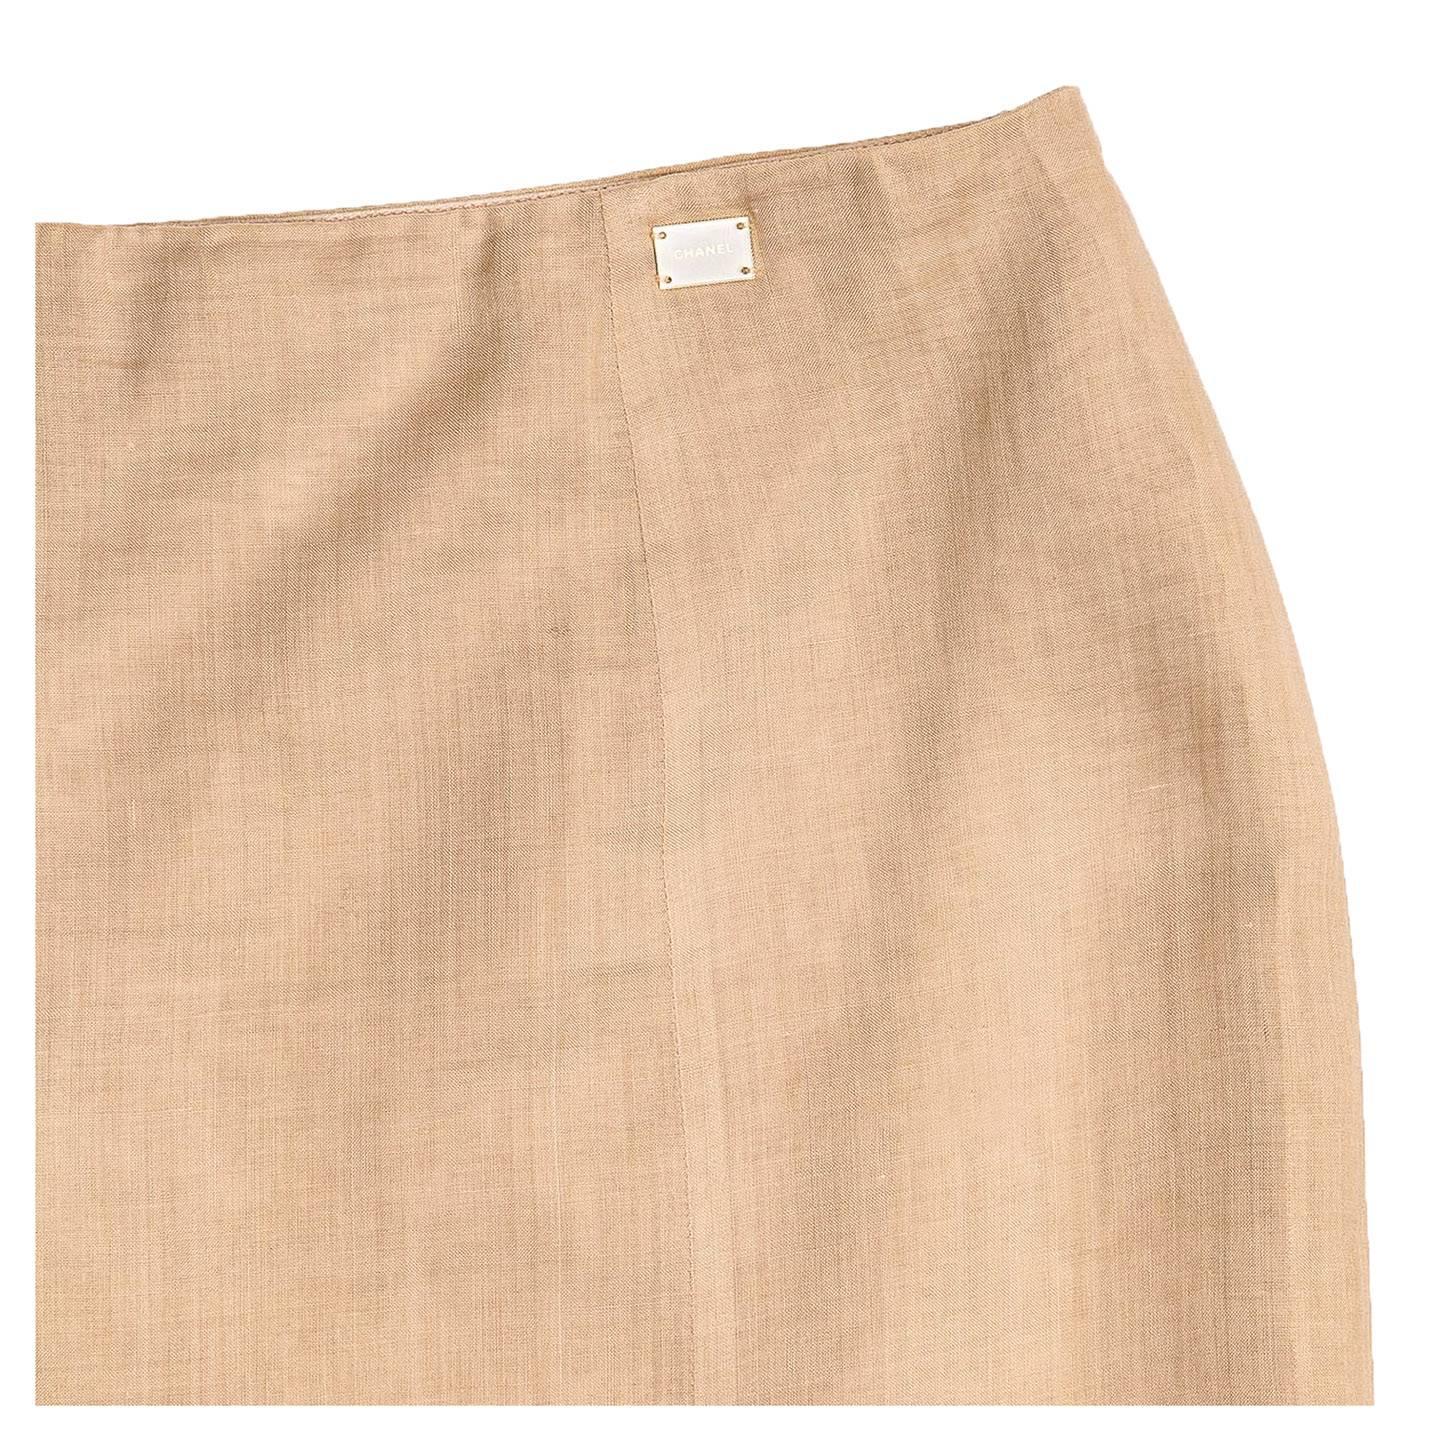 Chanel Tan Ramie Trumpet Style Skirt In Excellent Condition For Sale In Brooklyn, NY